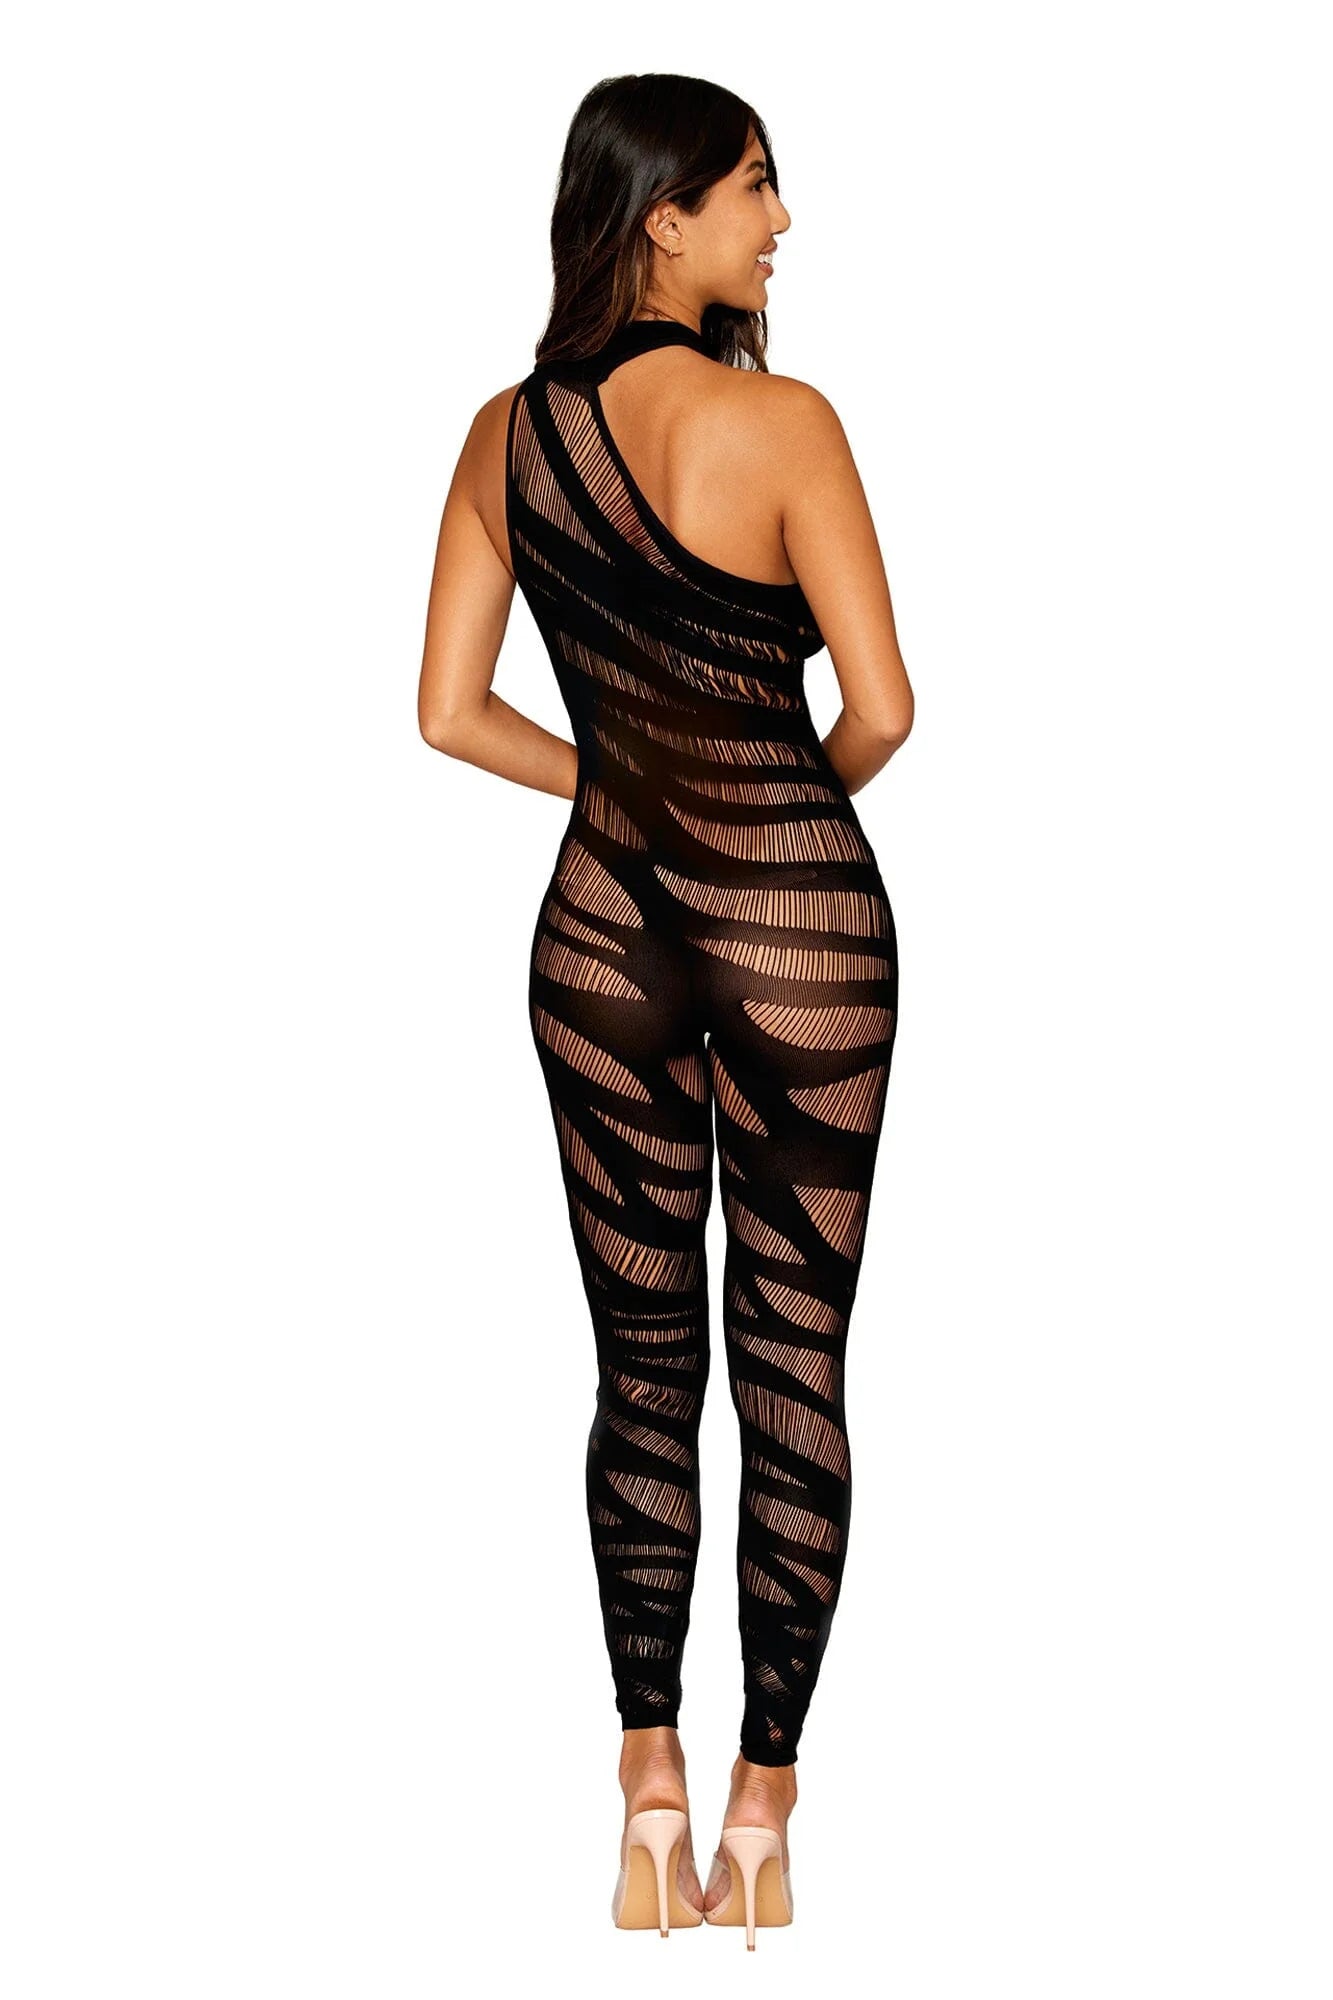 Asymmetrical Opaque Knitted Bodystocking with All-Over Slash Design Detail